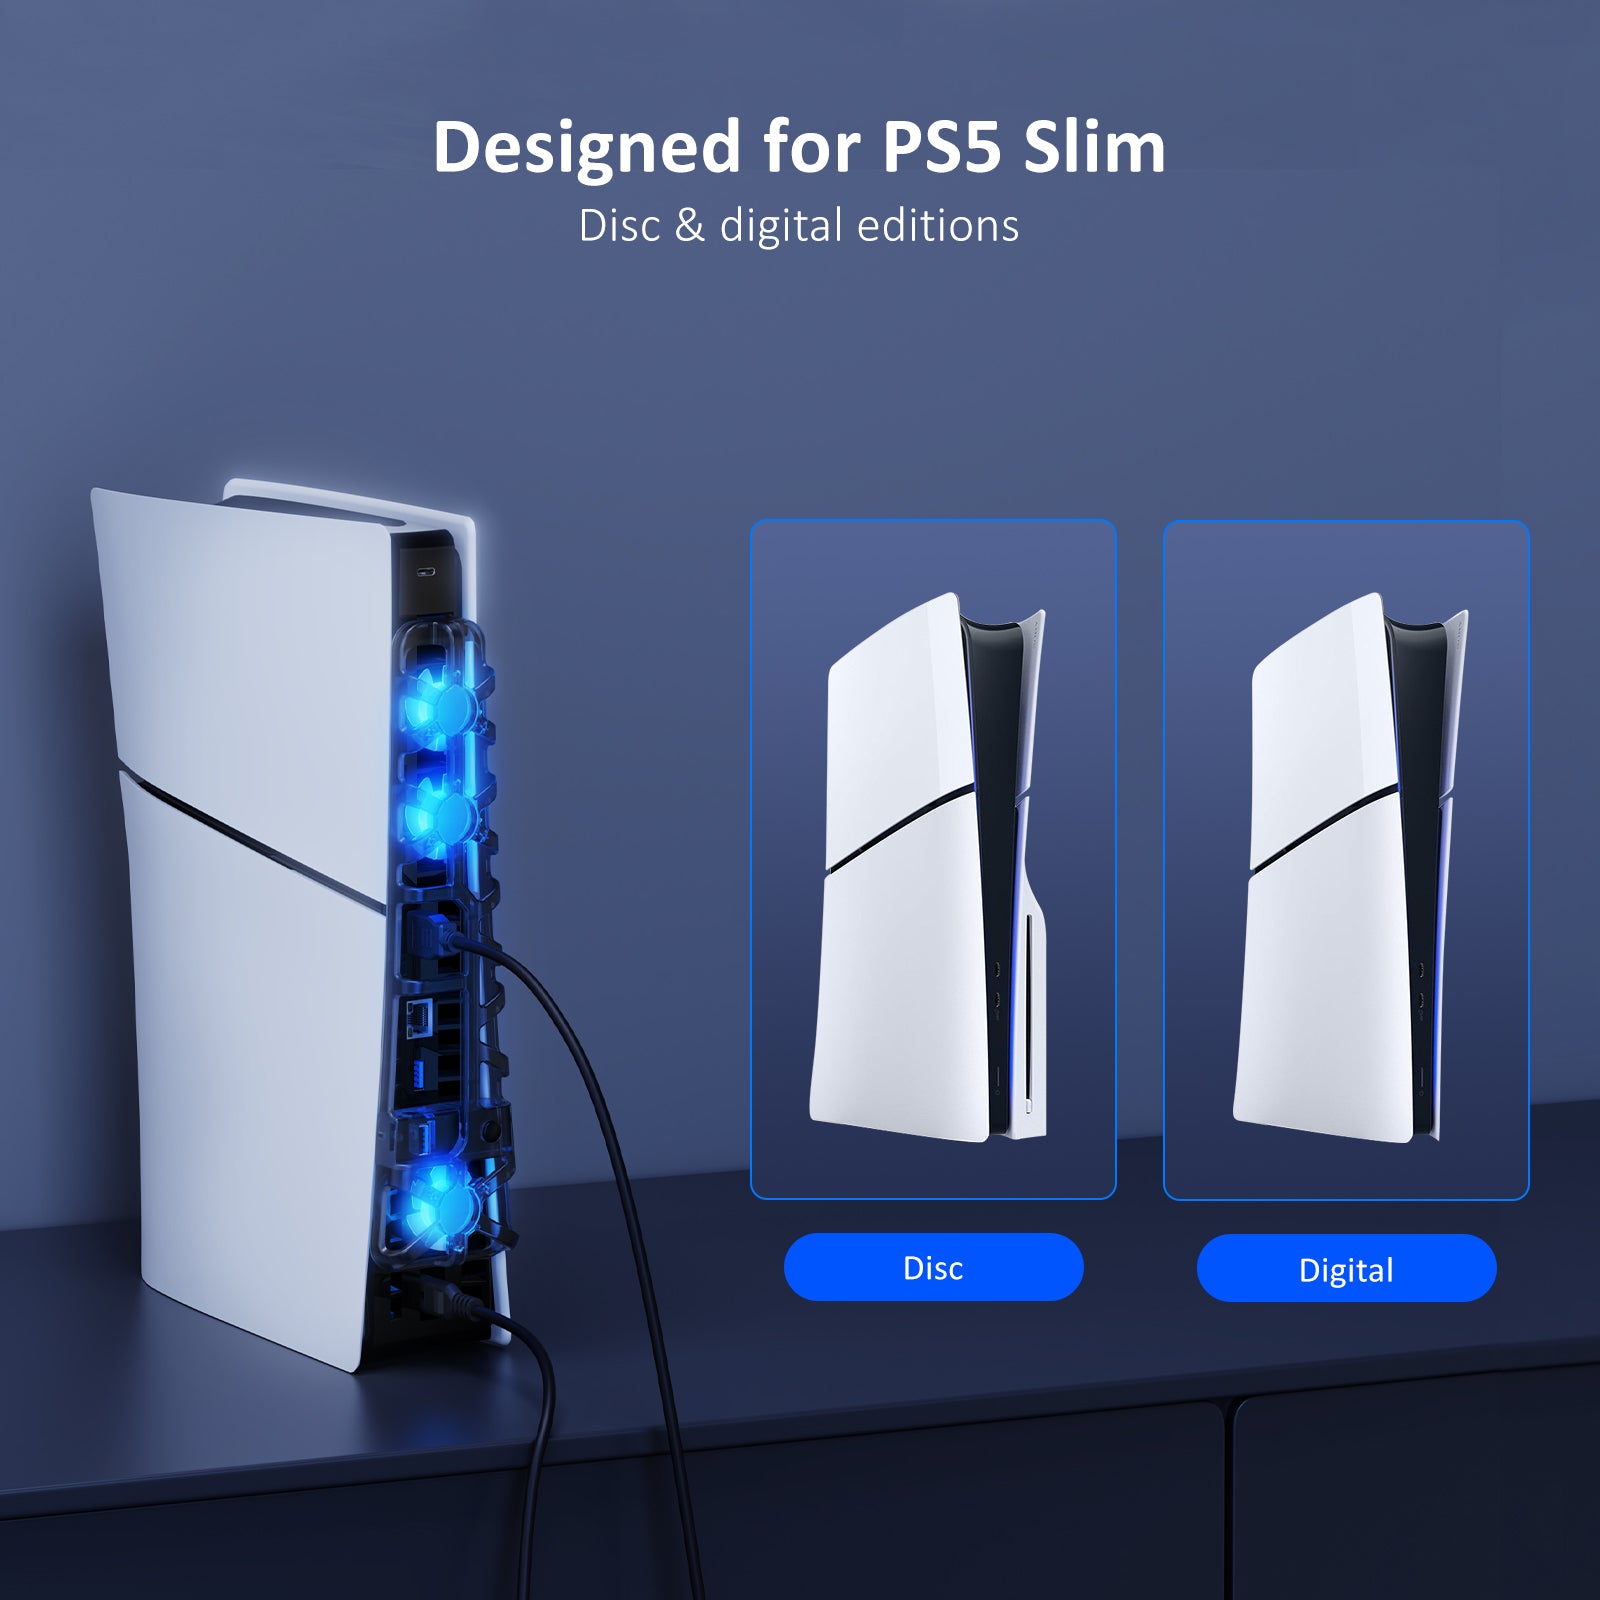 This fan is compatible with both the digital and disc versions of the PS5 Slim console.